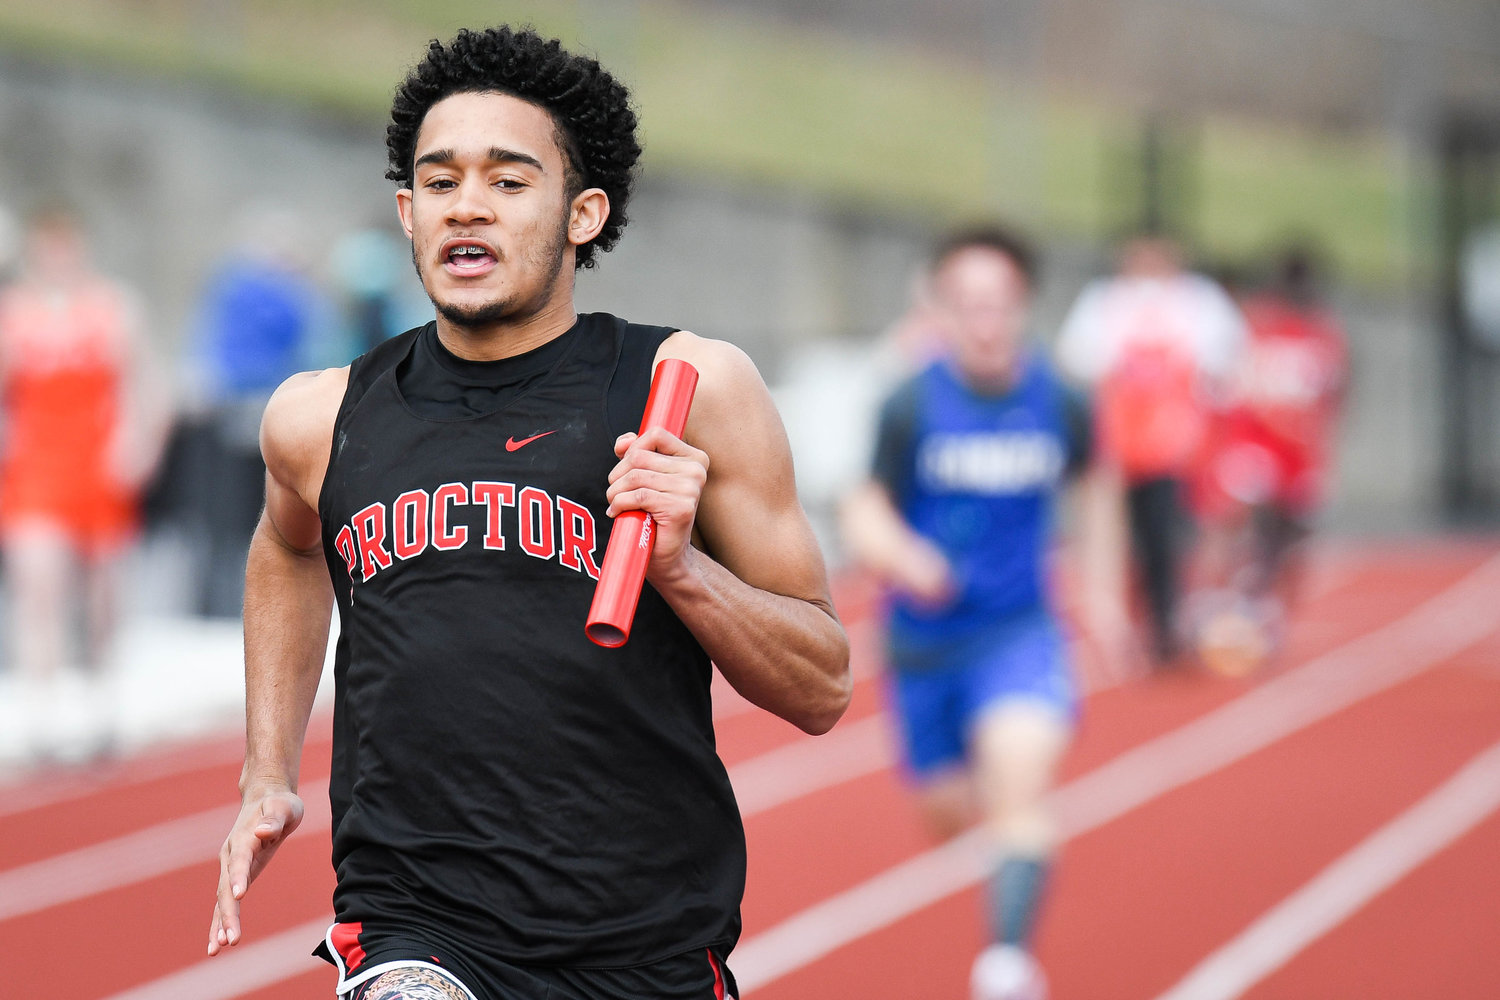 Thomas R. Proctor runner Chris Mateo competes in a 4 by 100 meter relay event during a track and field meet on Tuesday at PHS Stadium in Utica.